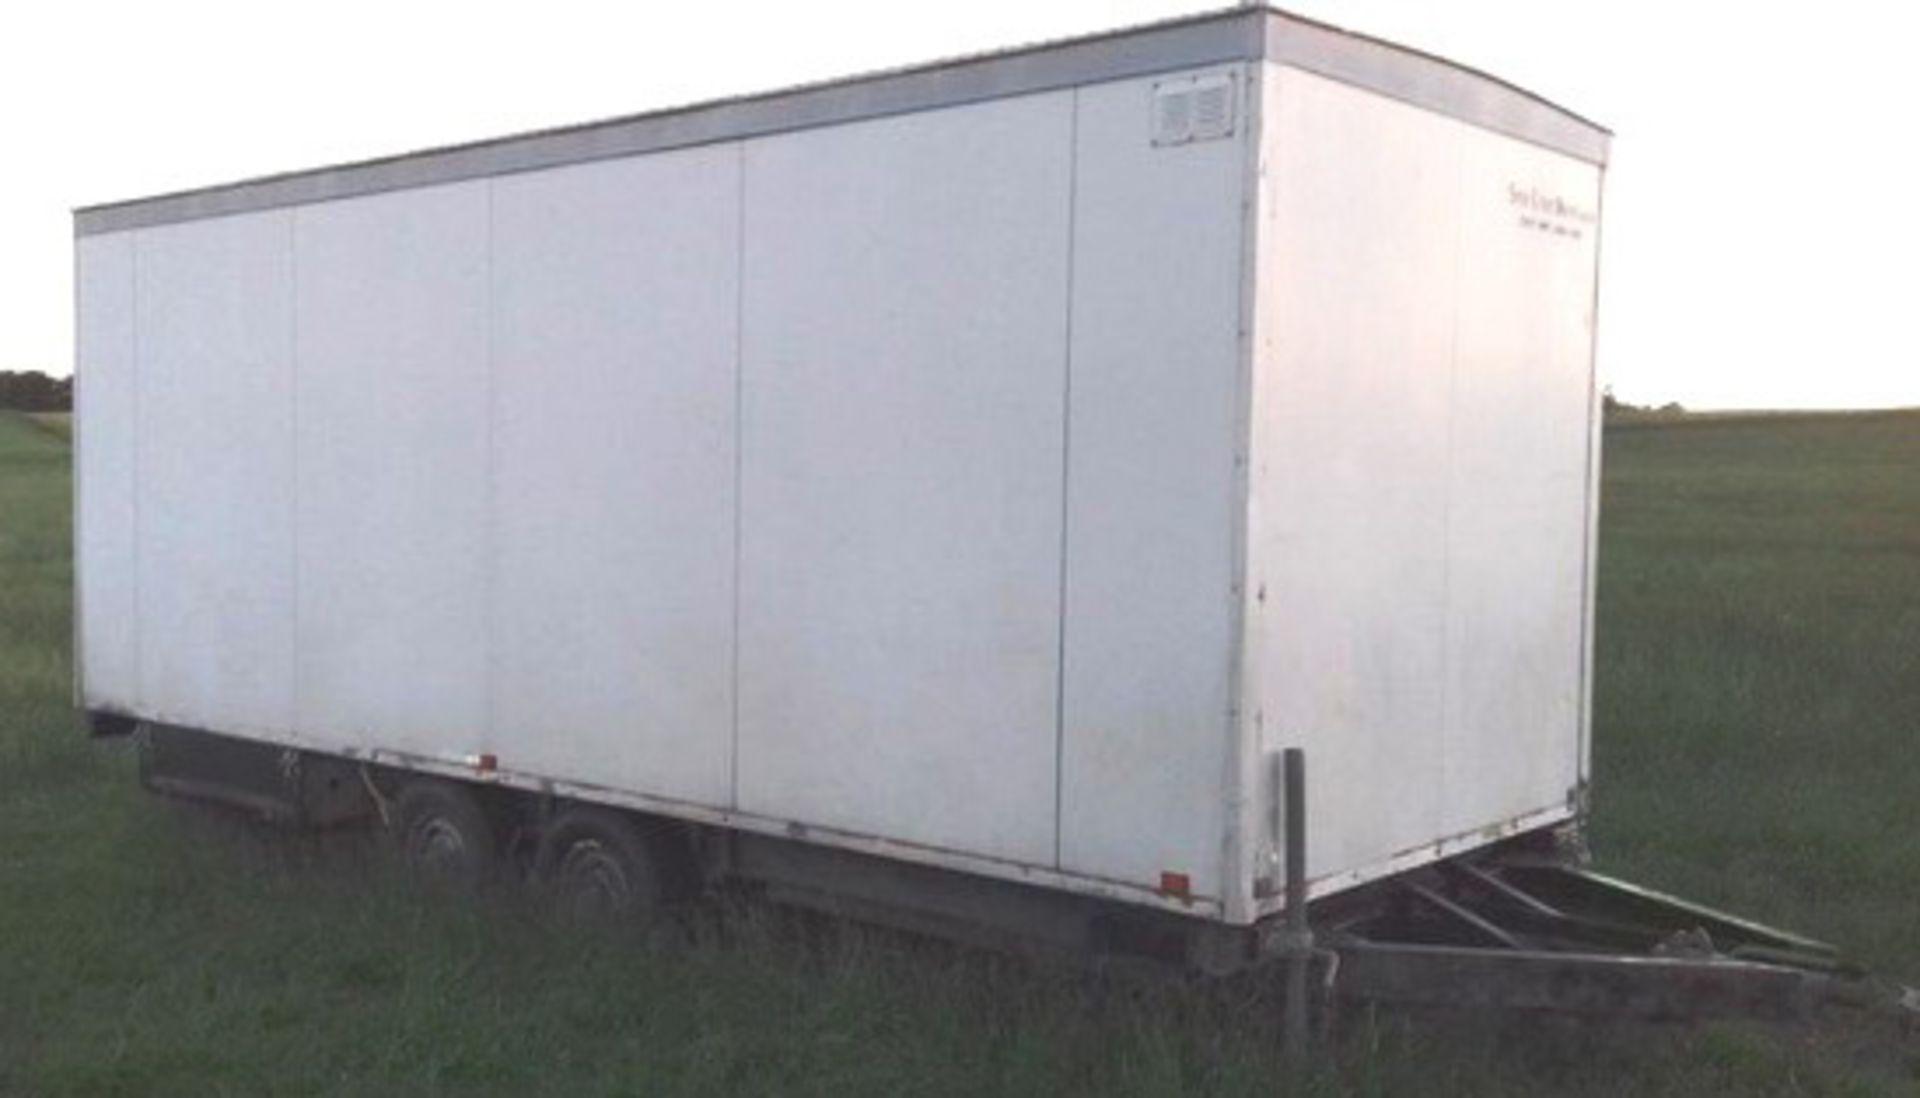 Event hire mobile toilet block c/w 1996 roll-a-long 20' x 7' trailer on springs. Fully equipped for - Image 3 of 9